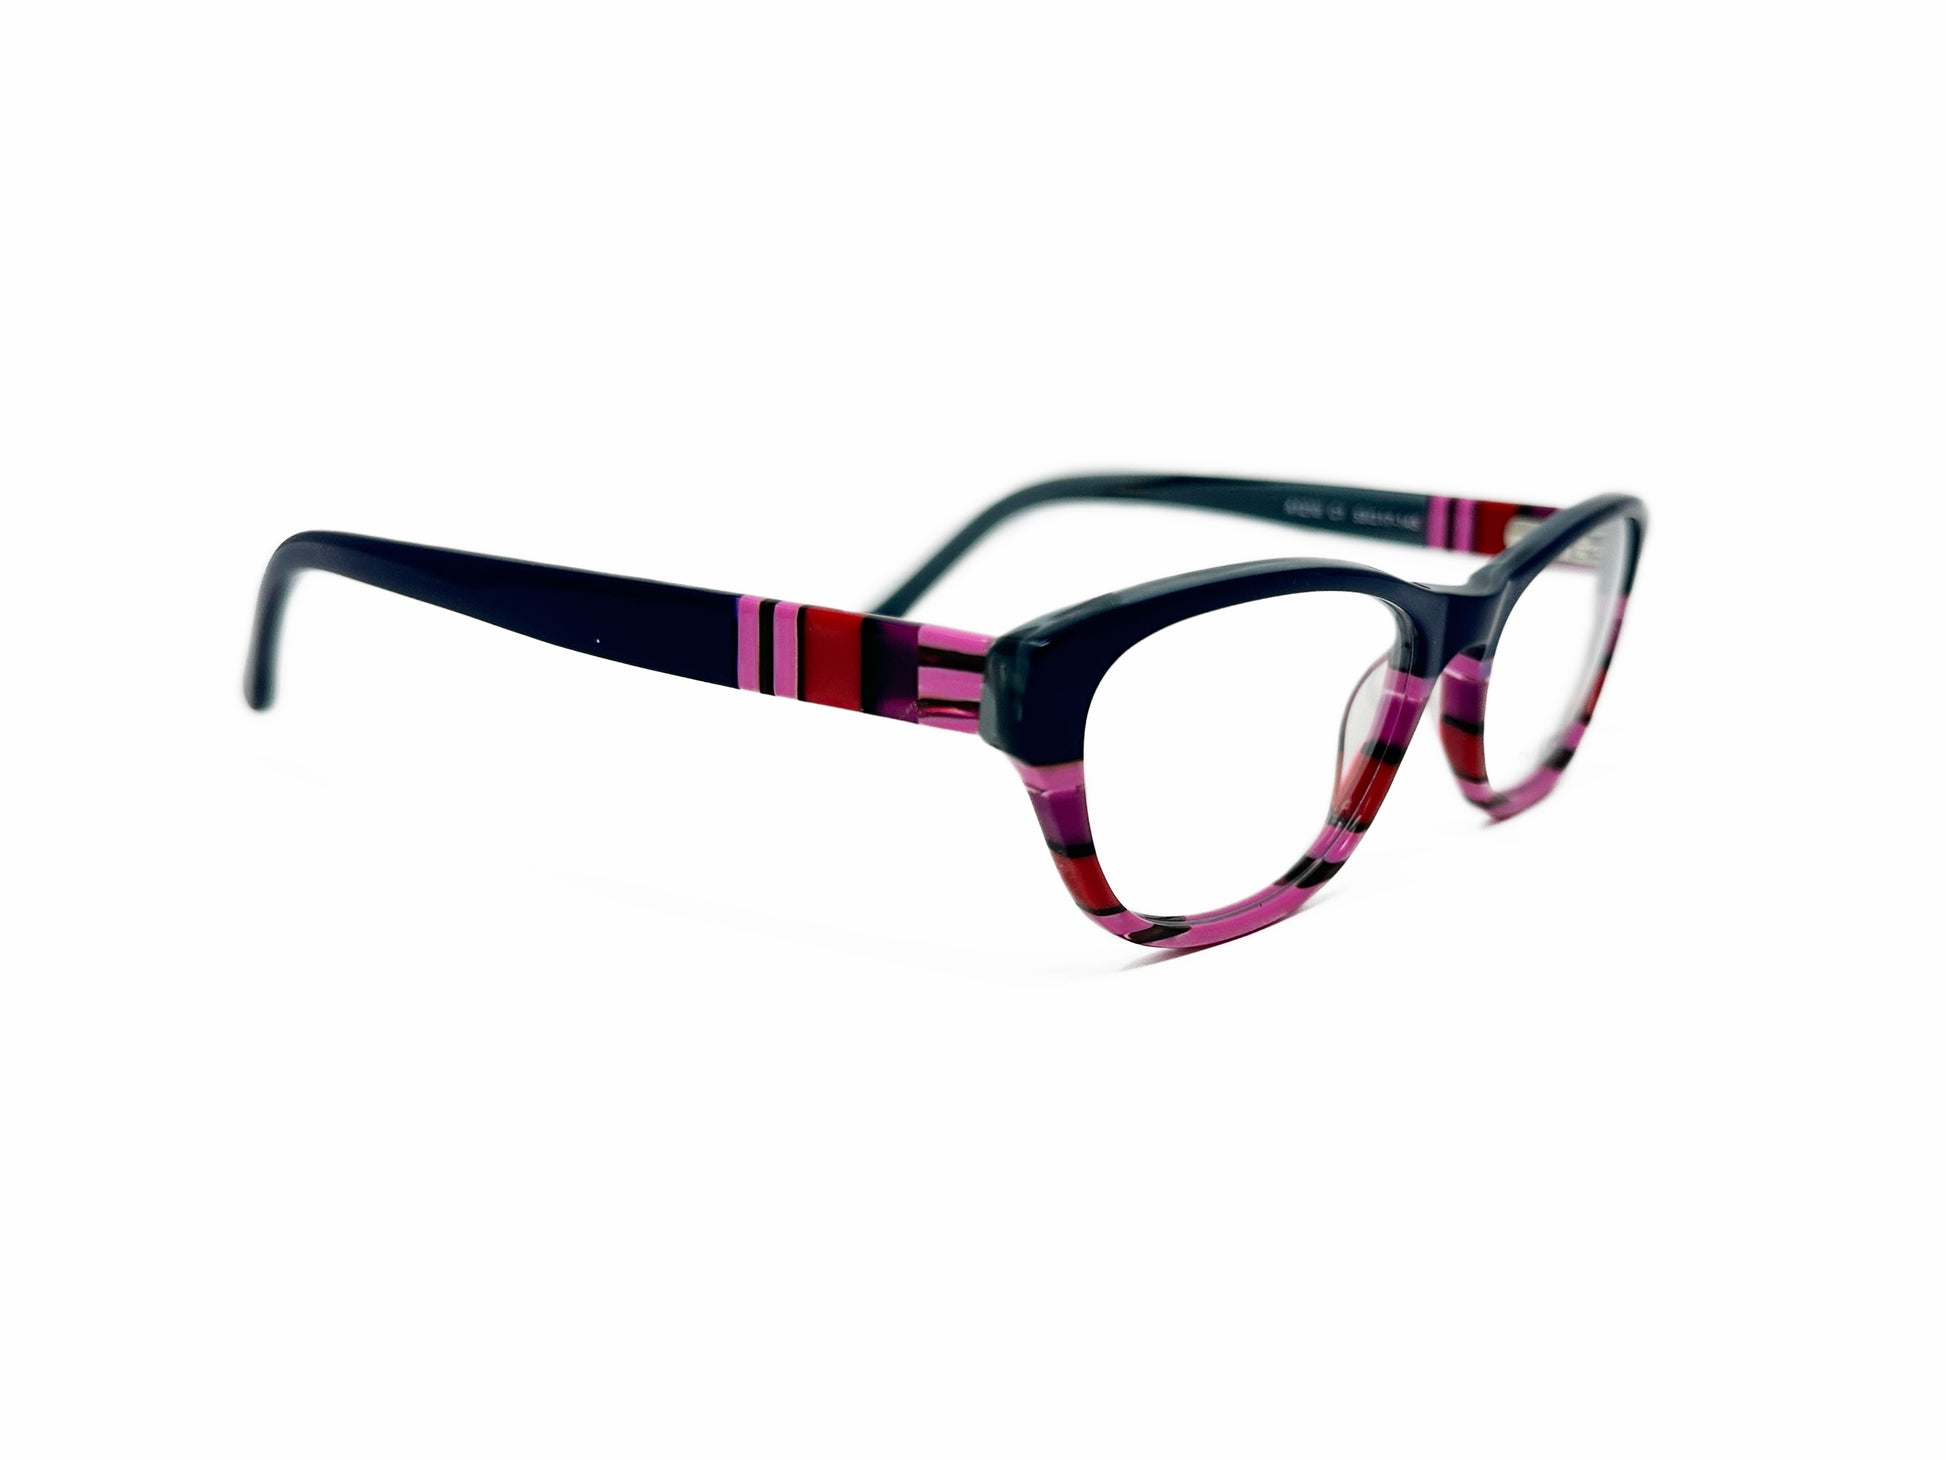 Outspoken acetate cat-eye optical frame. Model: A1210. Color: C1 - Black top with pink stripes at bottom. Side view.